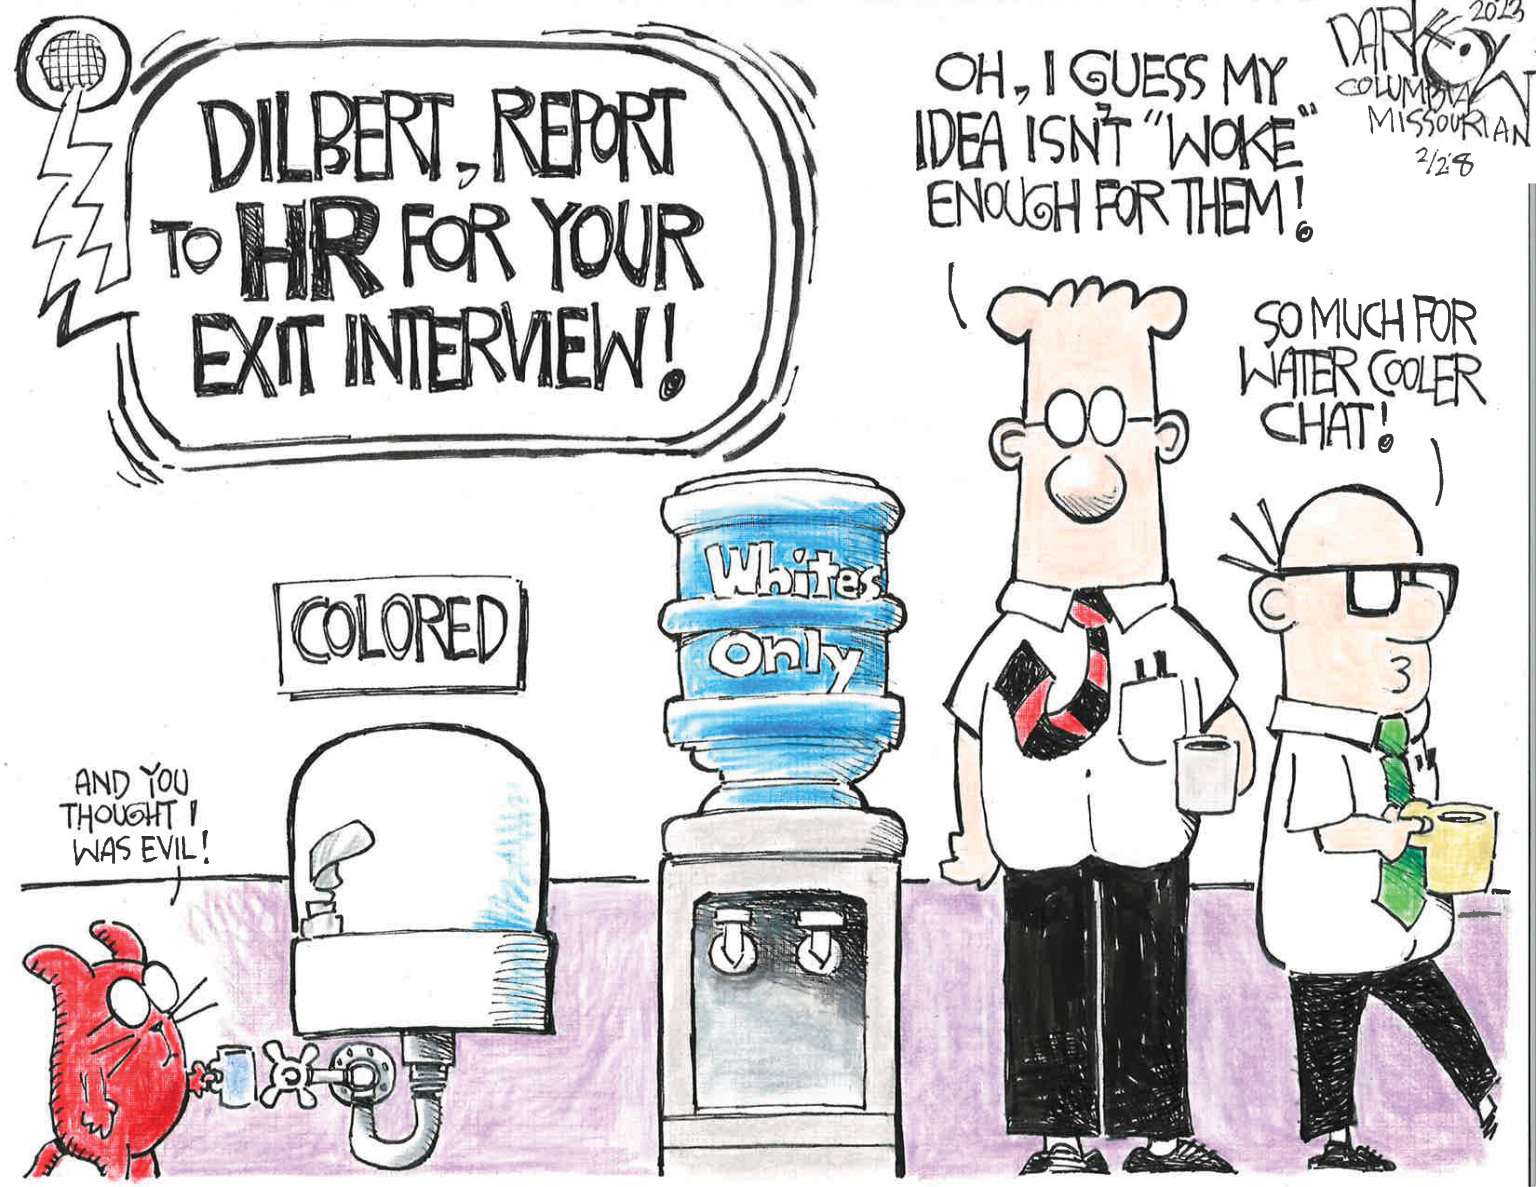 midland-daily-news-is-done-with-dilbert-scott-adams